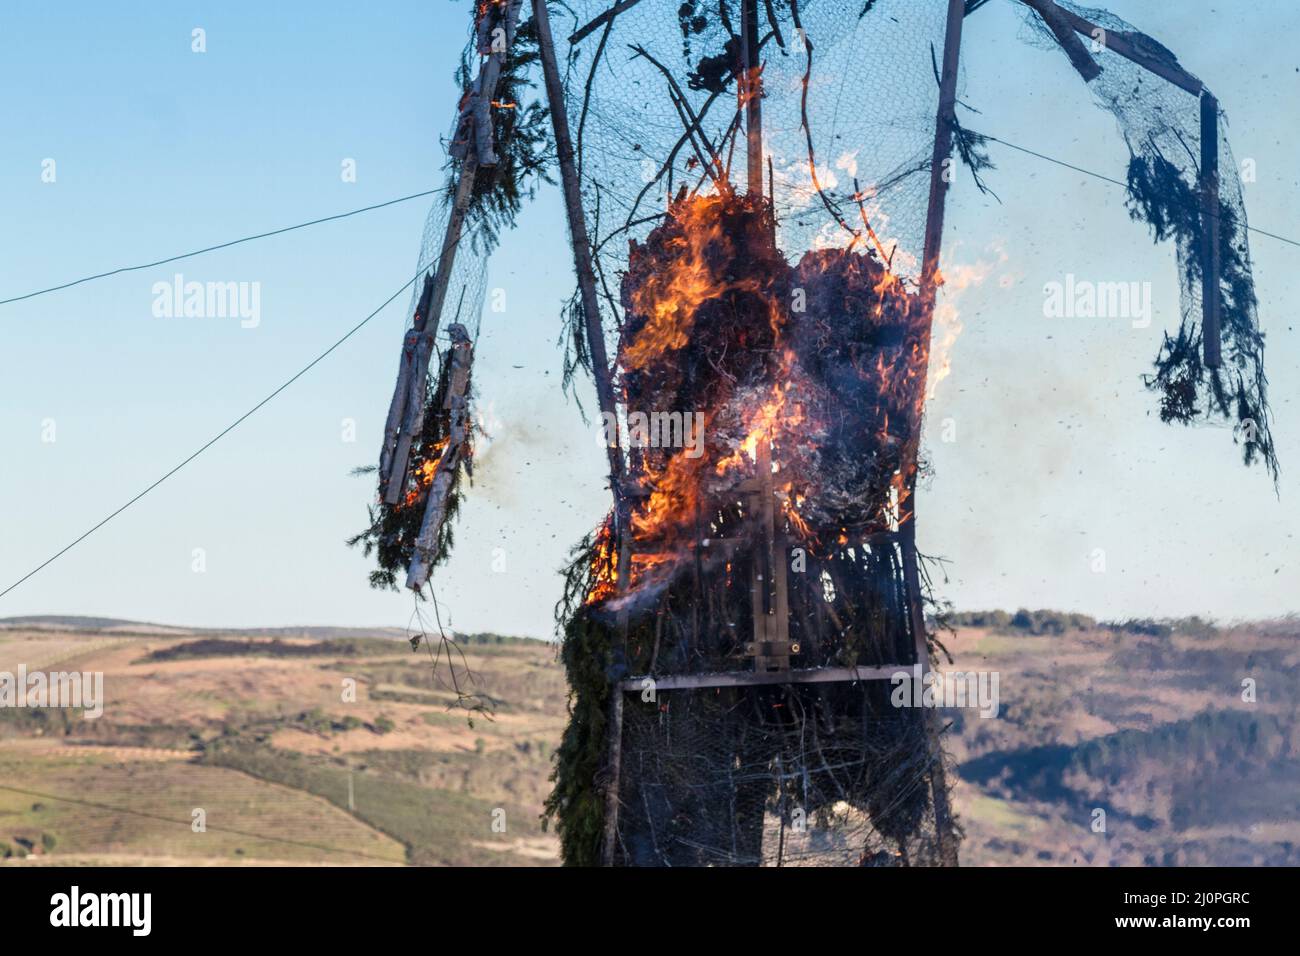 Podence - Traditional Portuguese Carnaval Queima do Entrudo ('burning the wicker man'), which signals the end of the festival. Stock Photo